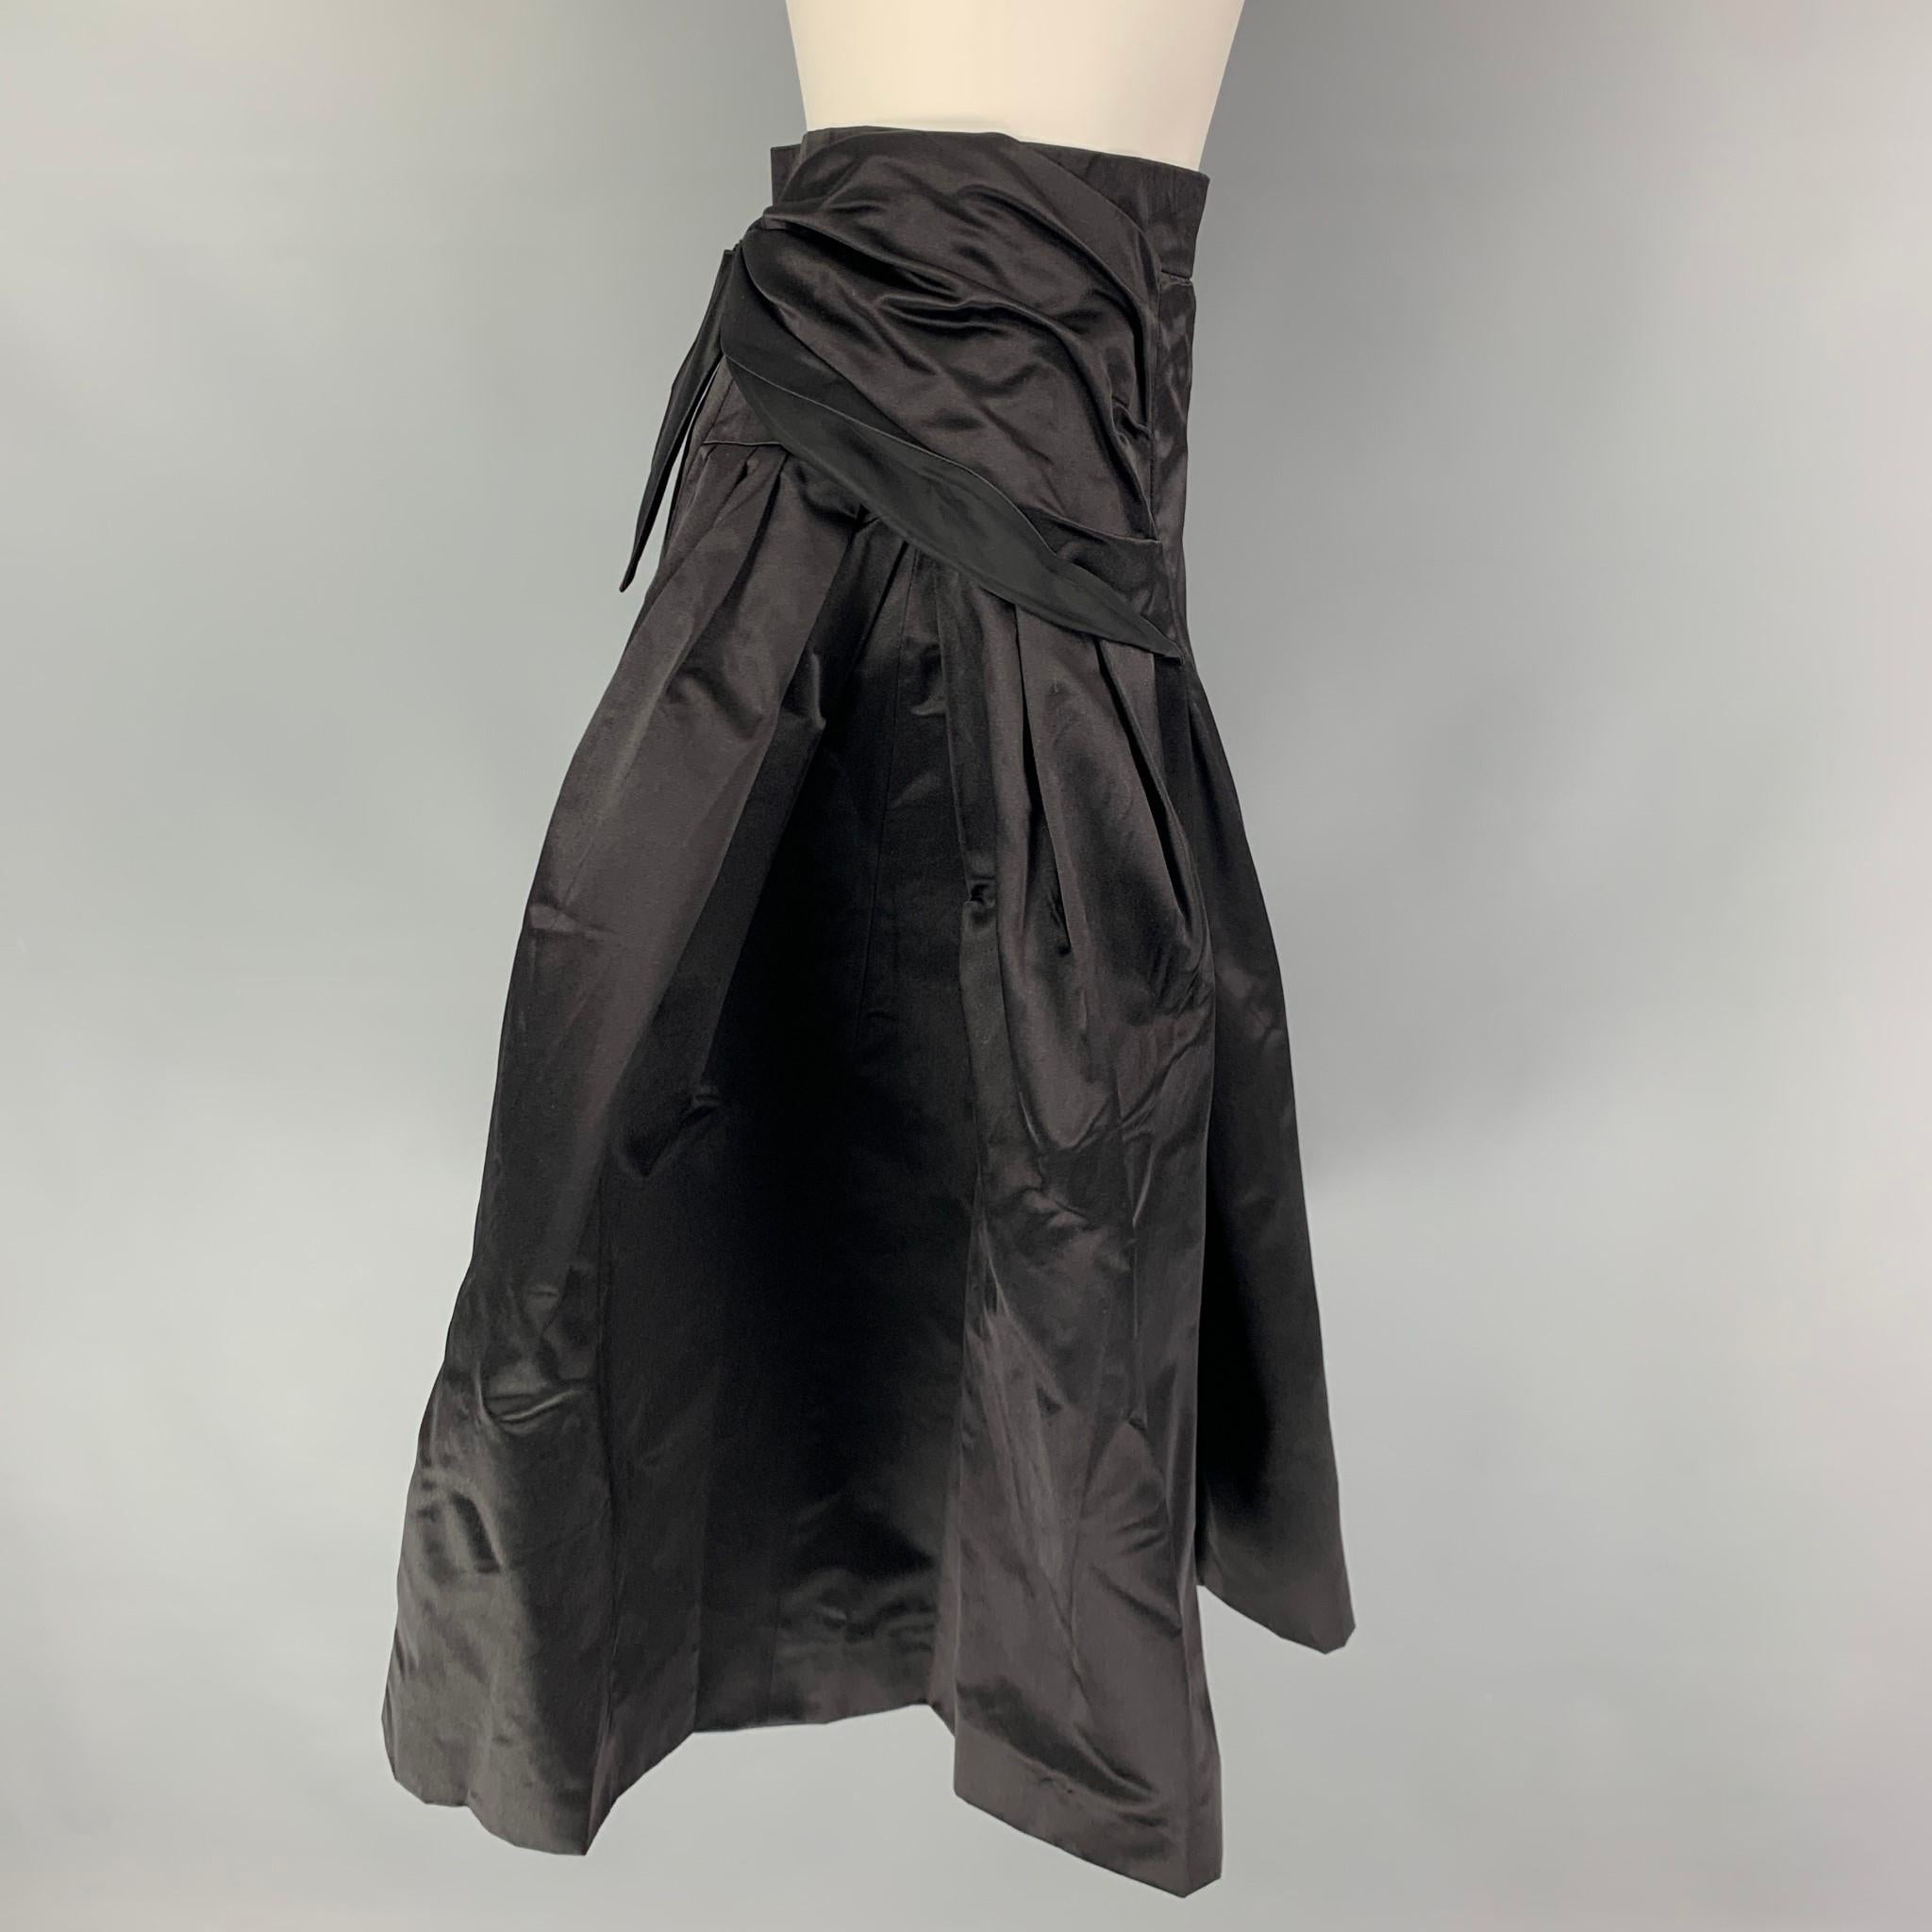 PRADA skirt comes in a black silk featuring an a-line style, detachable bow design, and a side zipper closure. Made in Italy. 

Very Good Pre-Owned Condition.
Marked: 42

Measurements:

Waist: 26 in.
Hip: 34 in.
Length: 27 in.